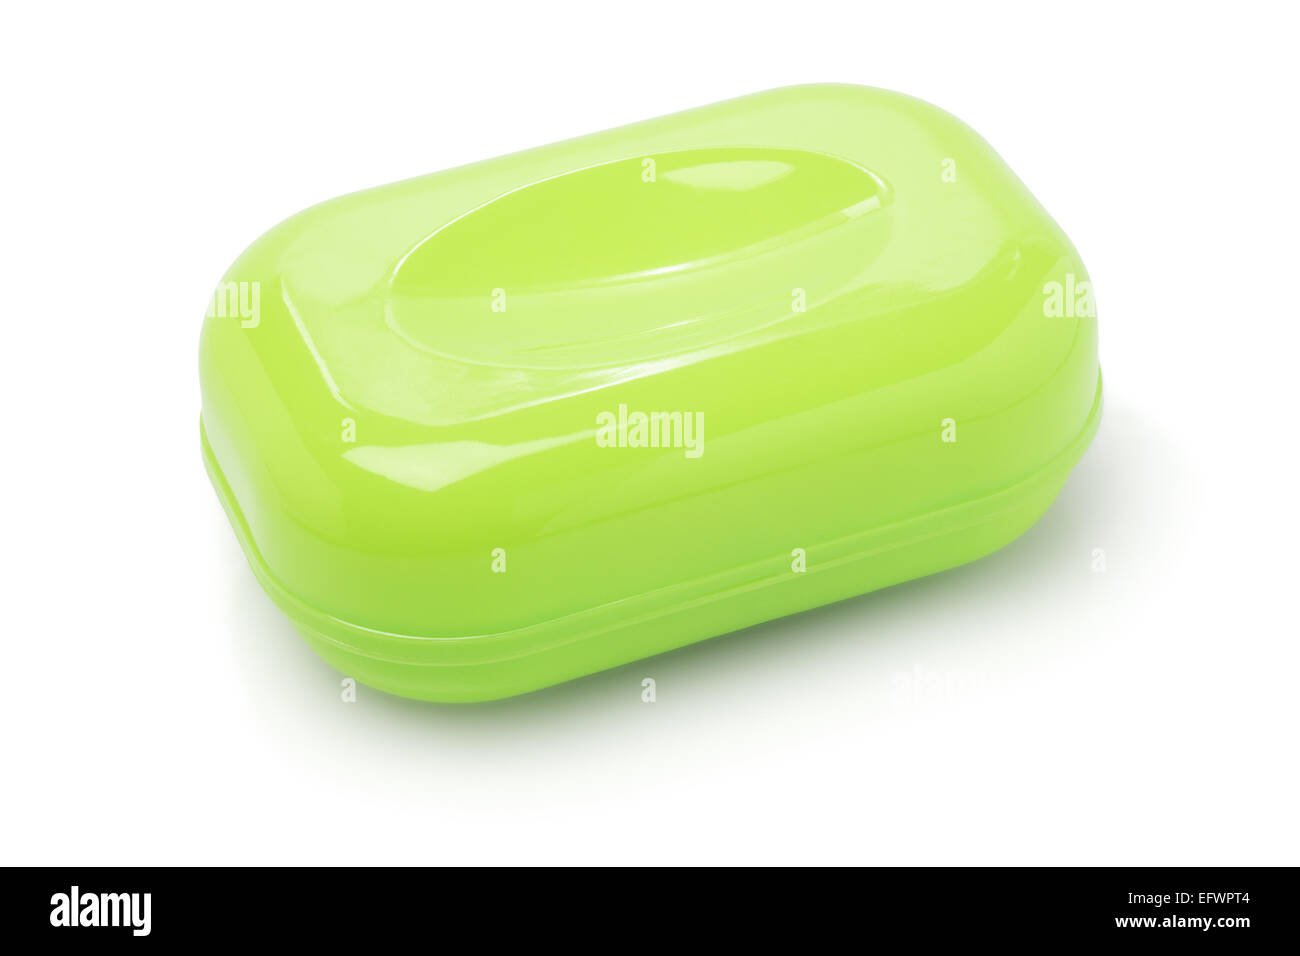 Plastic Soap Container On White Background Stock Photo